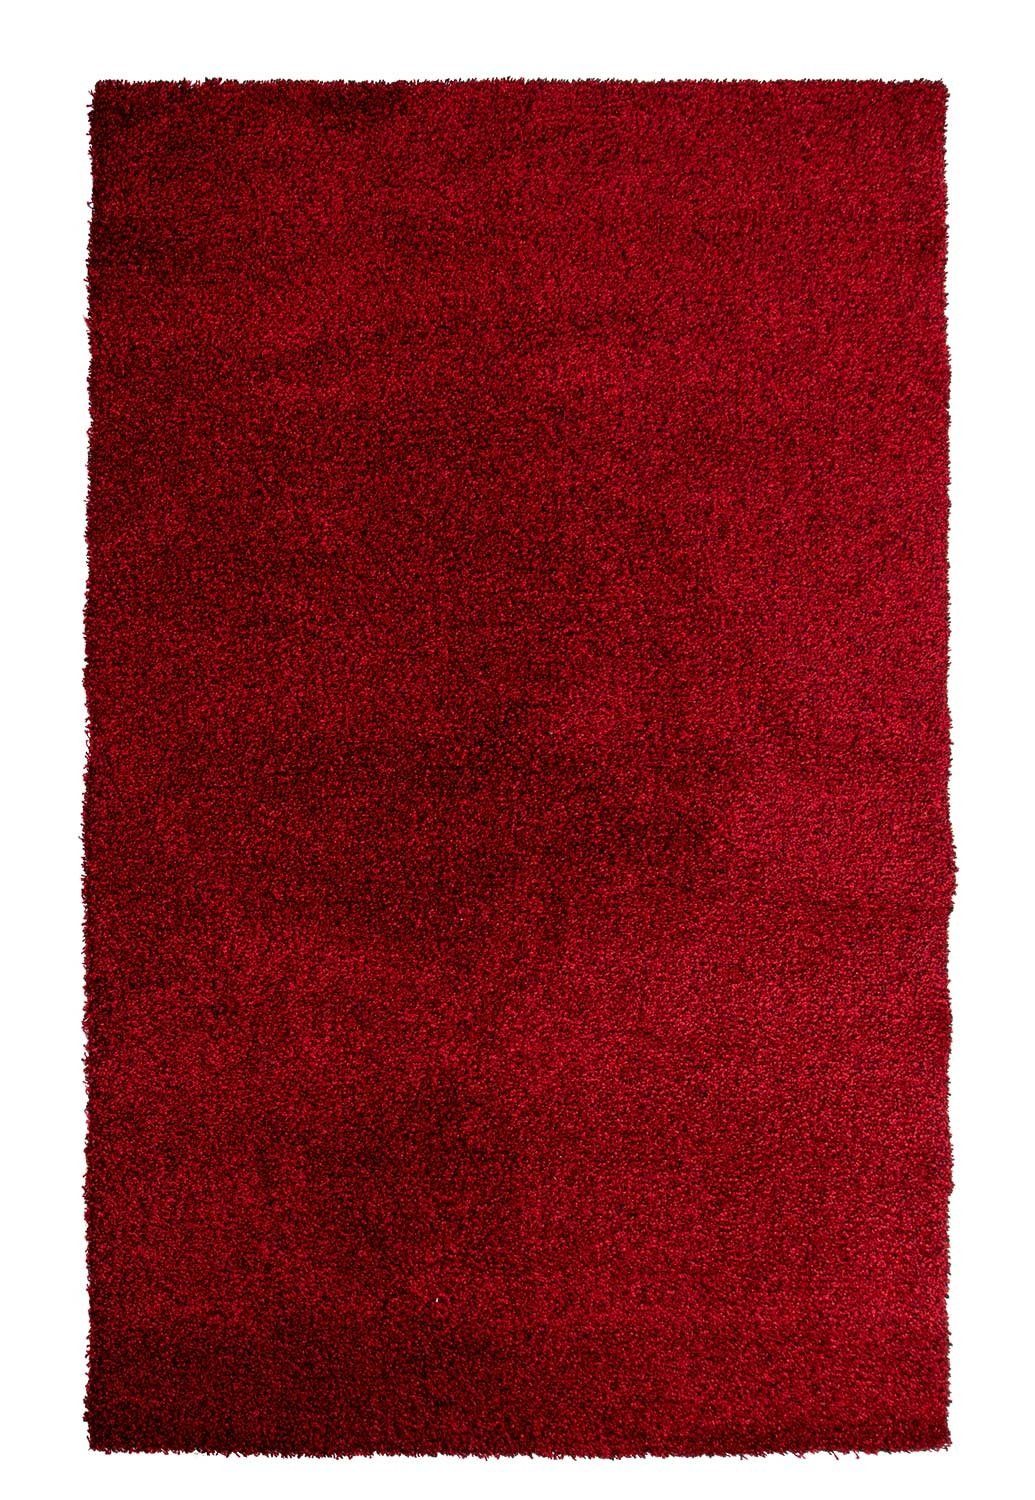 cm, 80 DELIGHT x Balta Polyester, mm COSY, Rot, Teppich Höhe: 22 rechteckig, 150 Rugs,